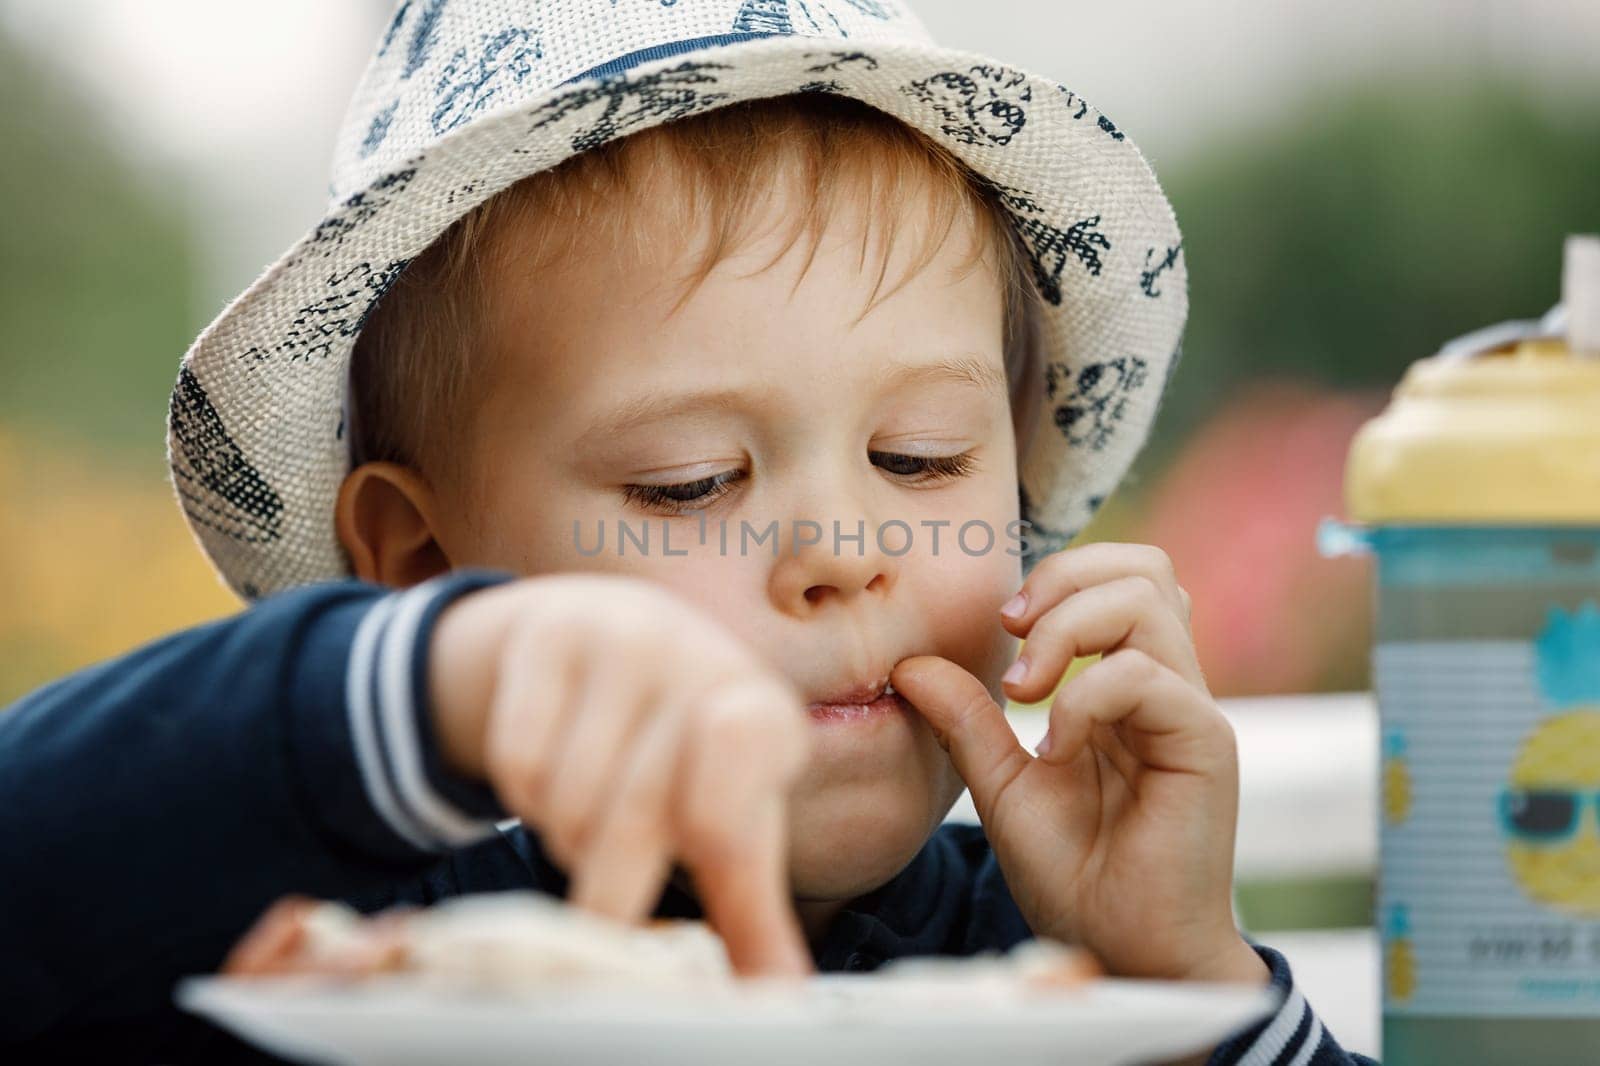 The boy in the summer garden chooses and tastes food from a plate.